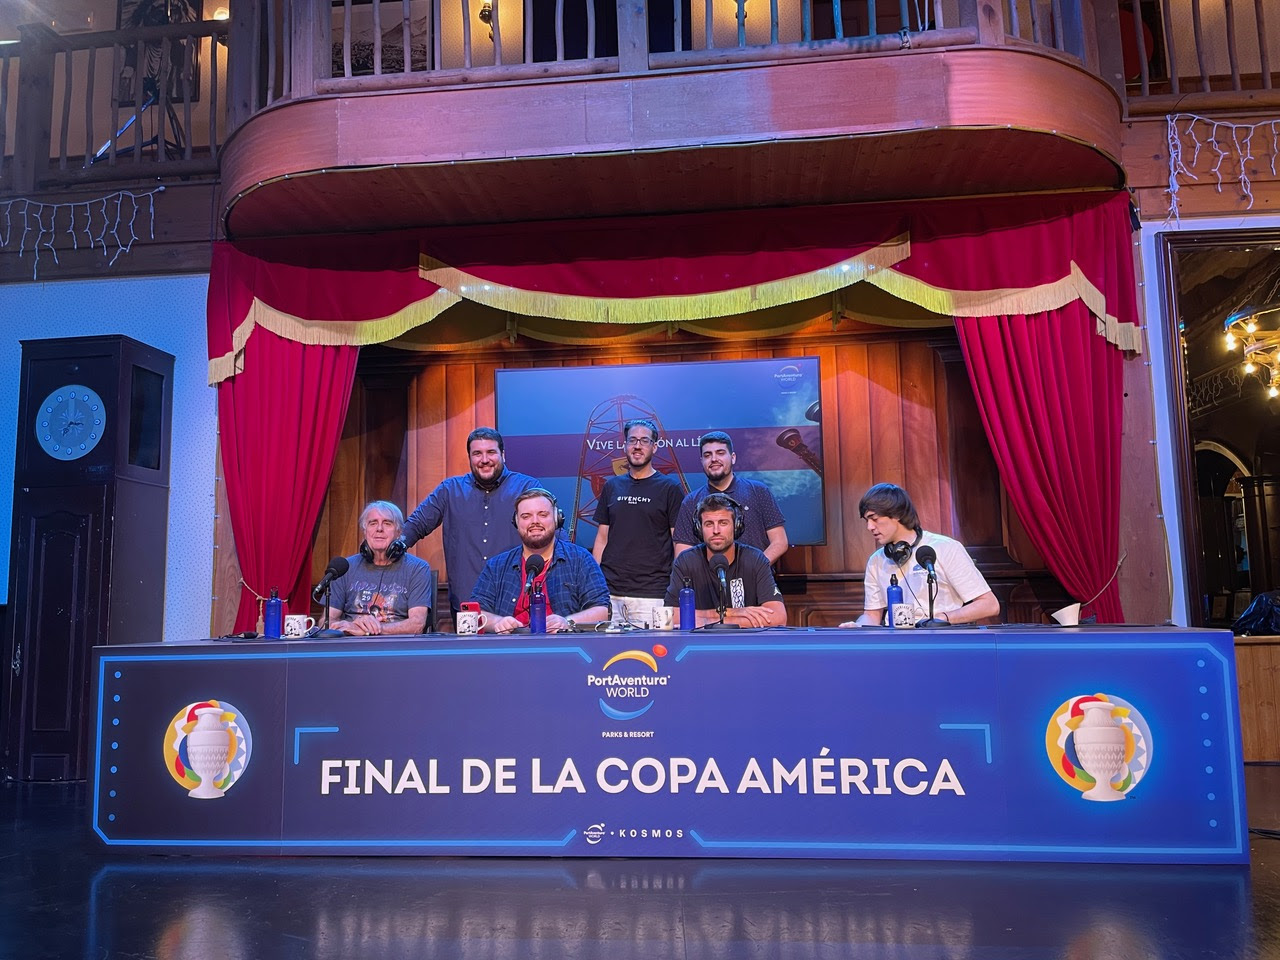 More than 640,000 spectators watched golden minute of Copa América final with Ibai Llanos